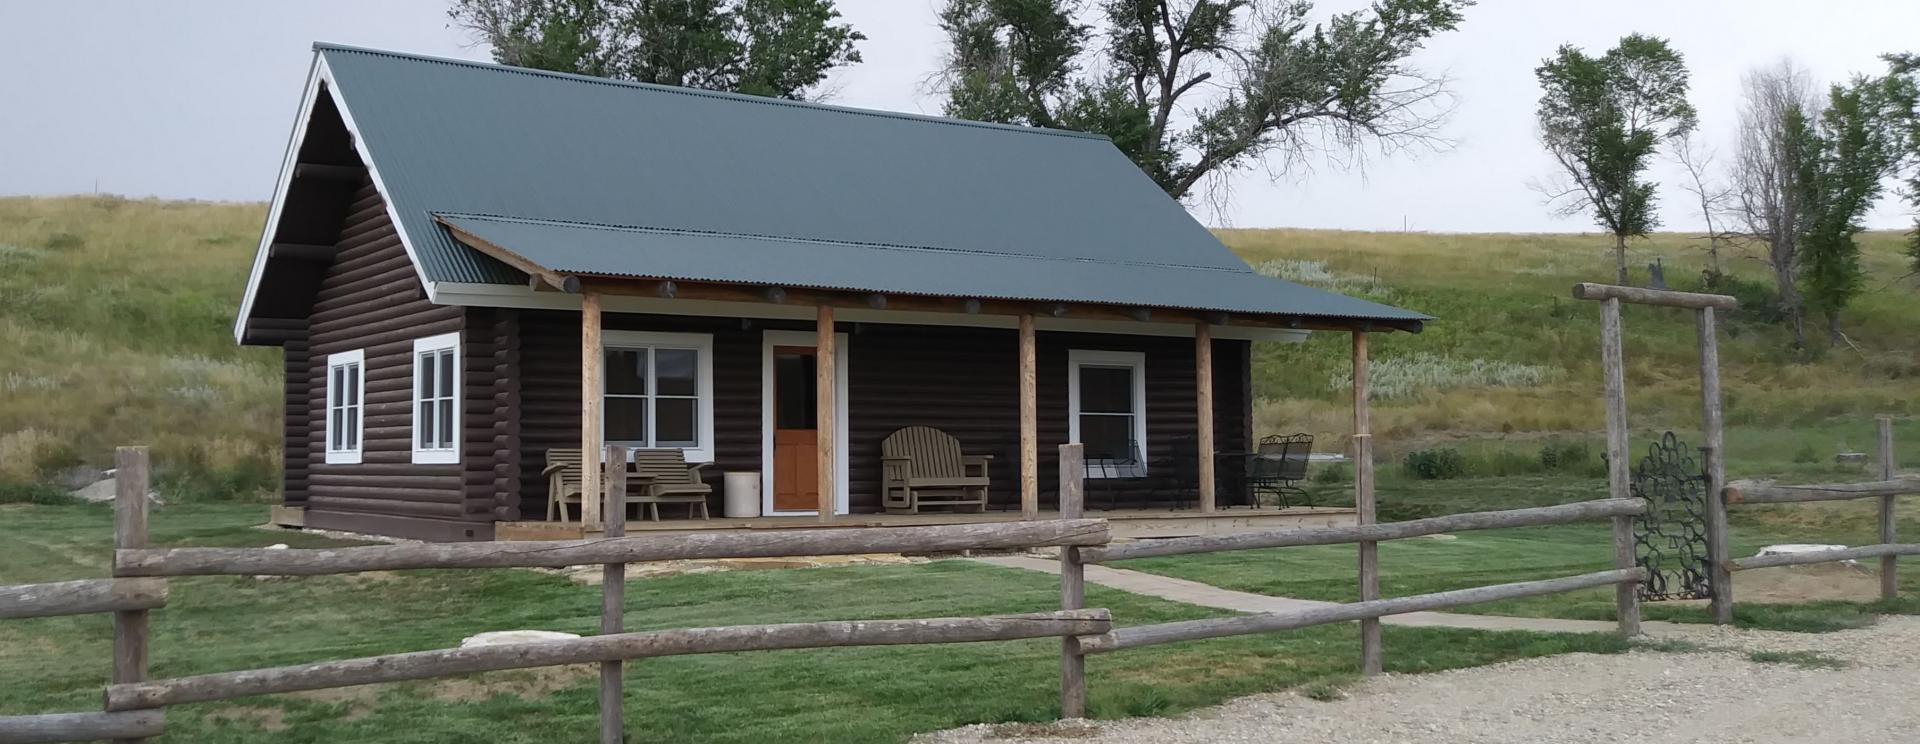 Looking to Relax at a Genuine Ranch on a Quiet Country Road?